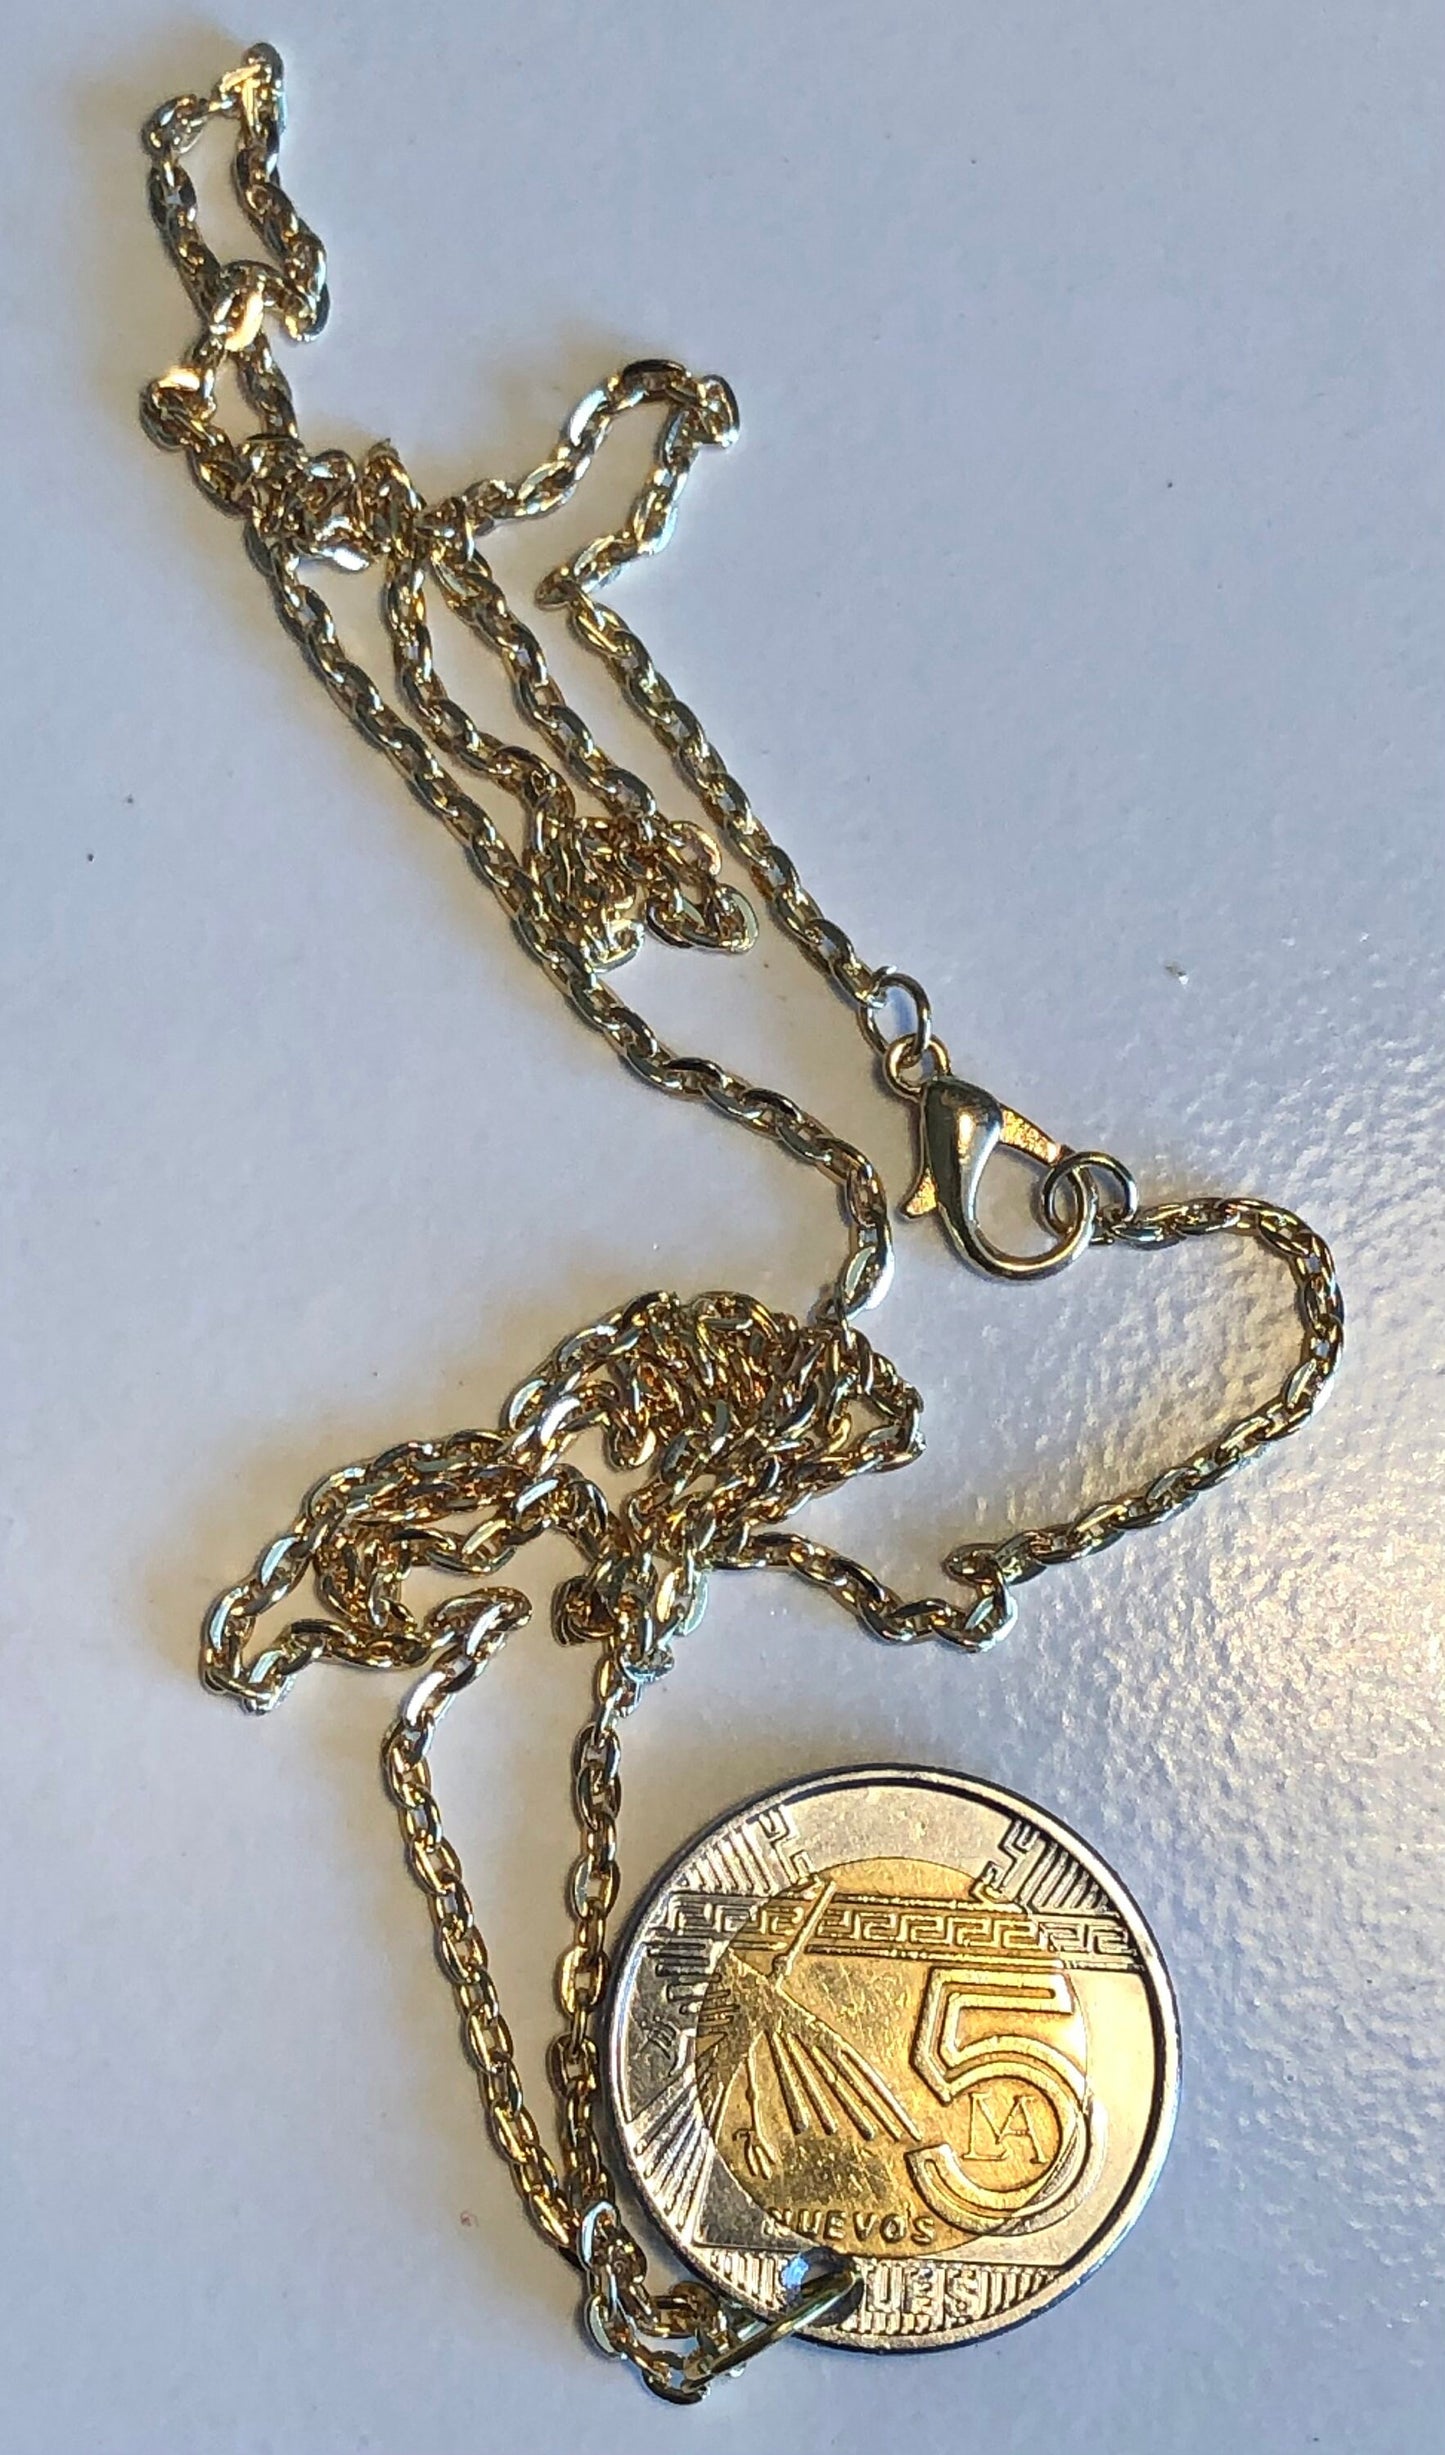 Peru Coin Pendant Peruvian 5 Nuevos Soles Personal Vintage Necklace Old Handmade Jewelry Gift Friend Charm For Him Her World Coin Collector